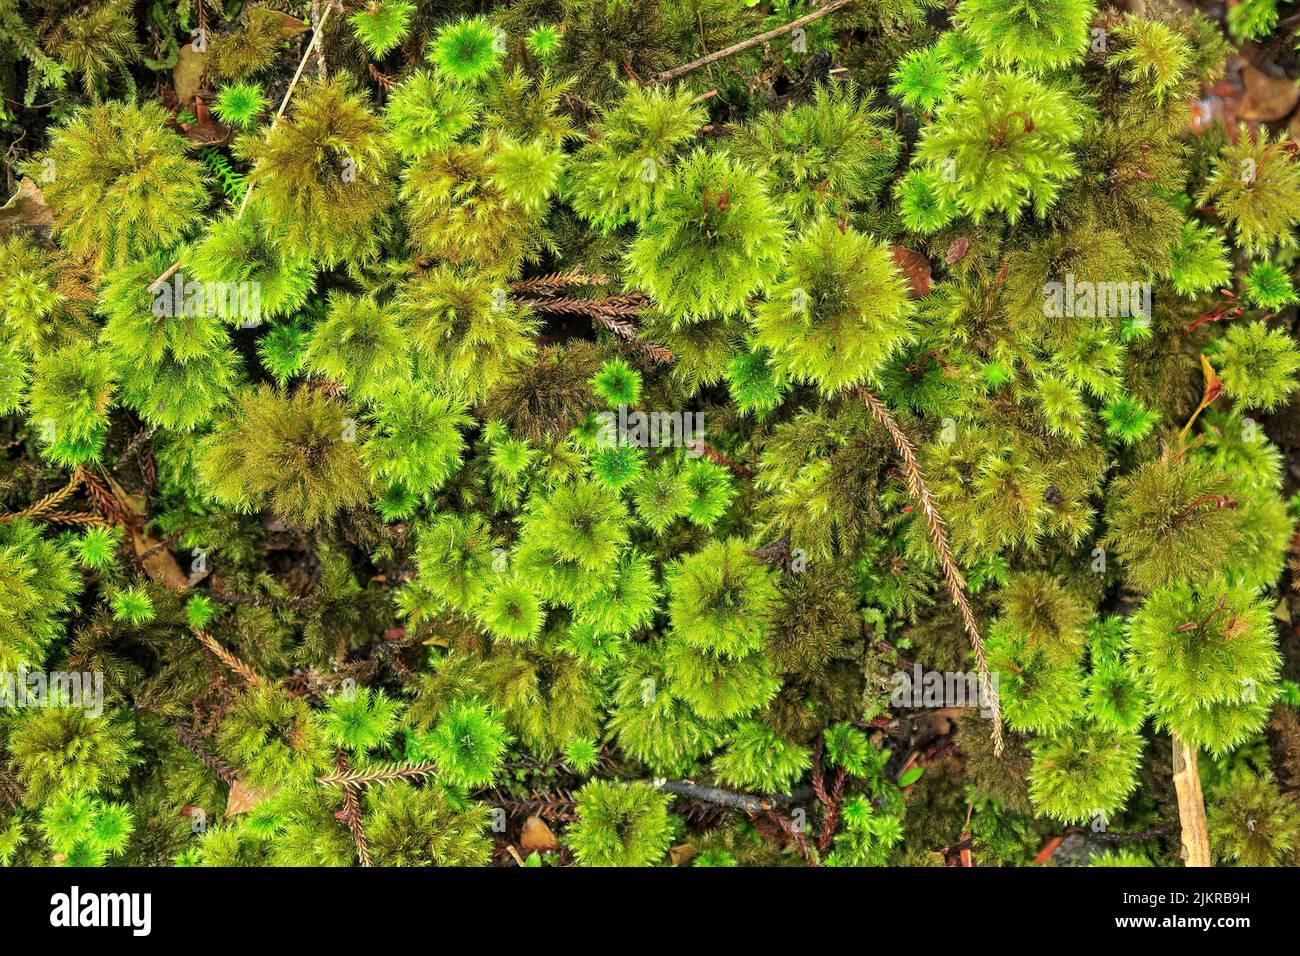 a-carpet-of-umbrella-moss-hypopterygium-sp-growing-on-the-forest-floor-found-on-ulva-island-new-zealand-2JKRB9H.jpg